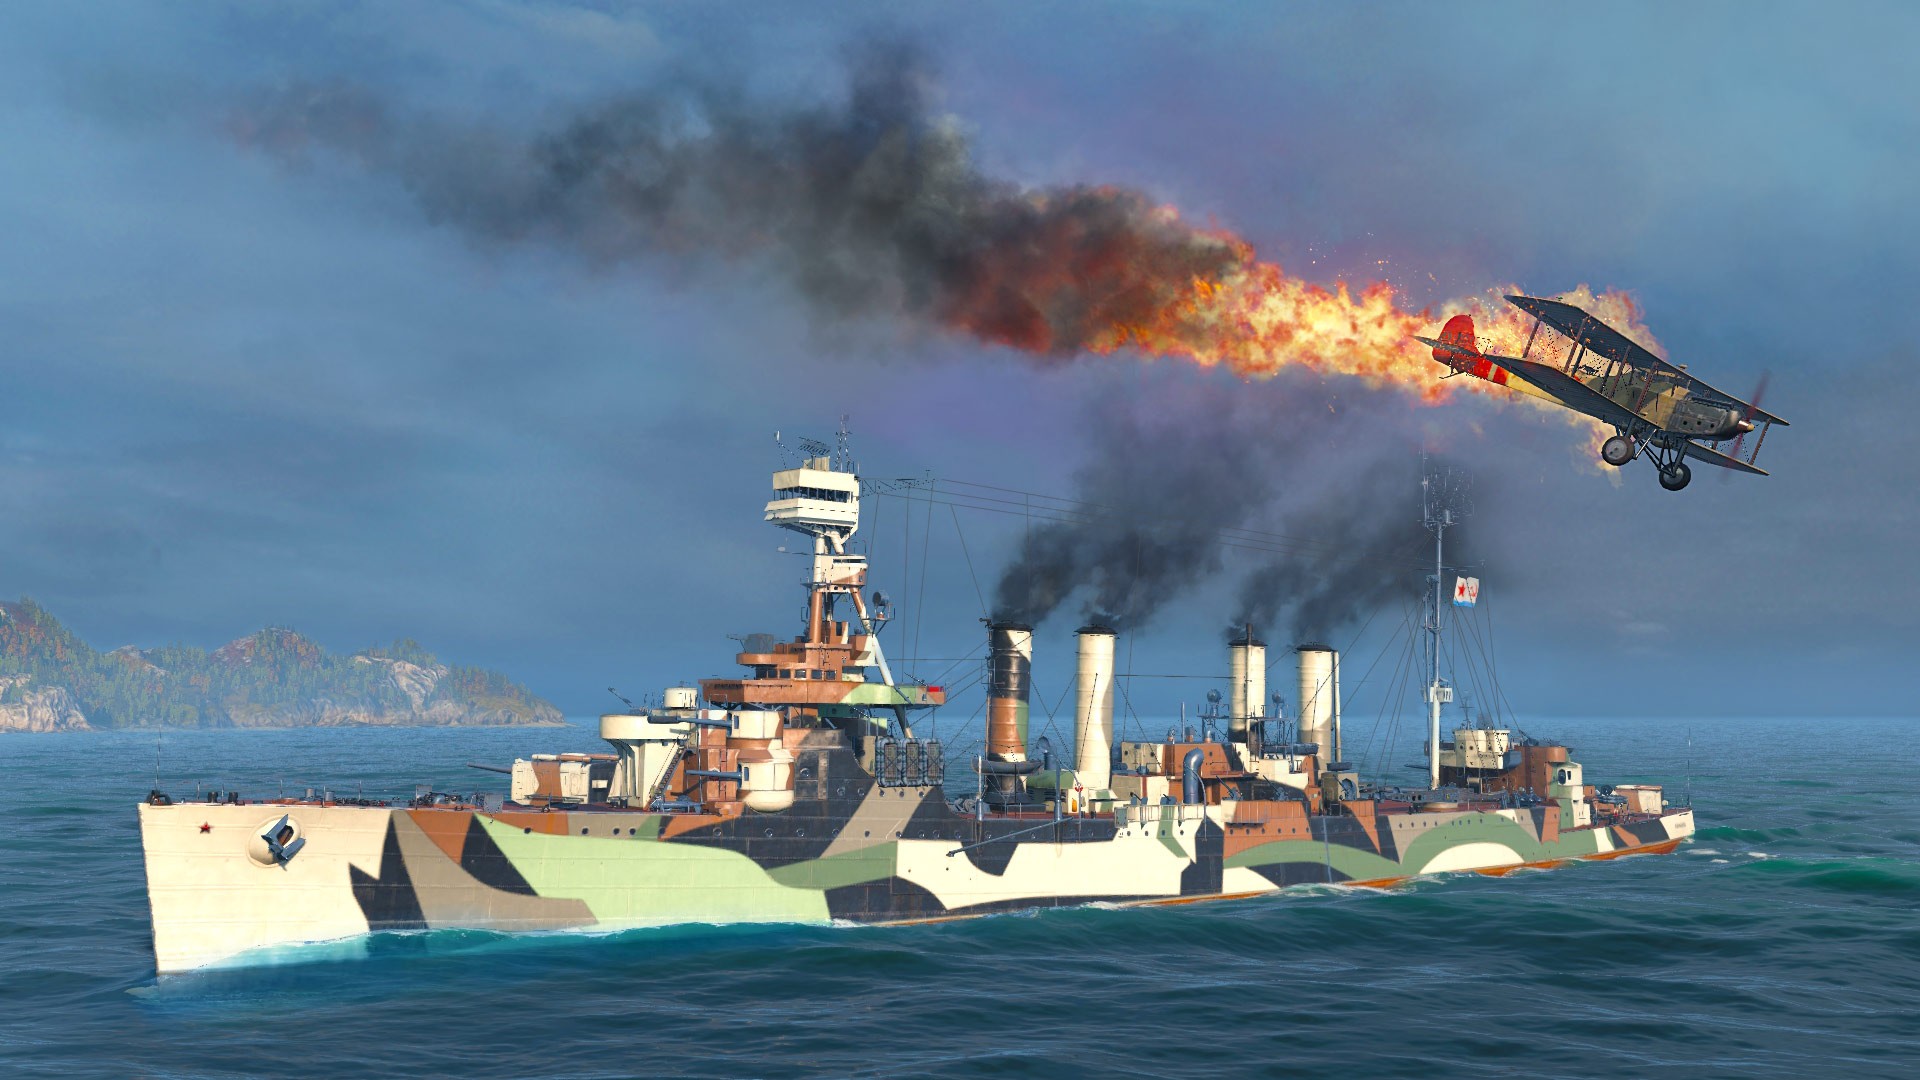 World of Warships - Official website of the award-winning free-to